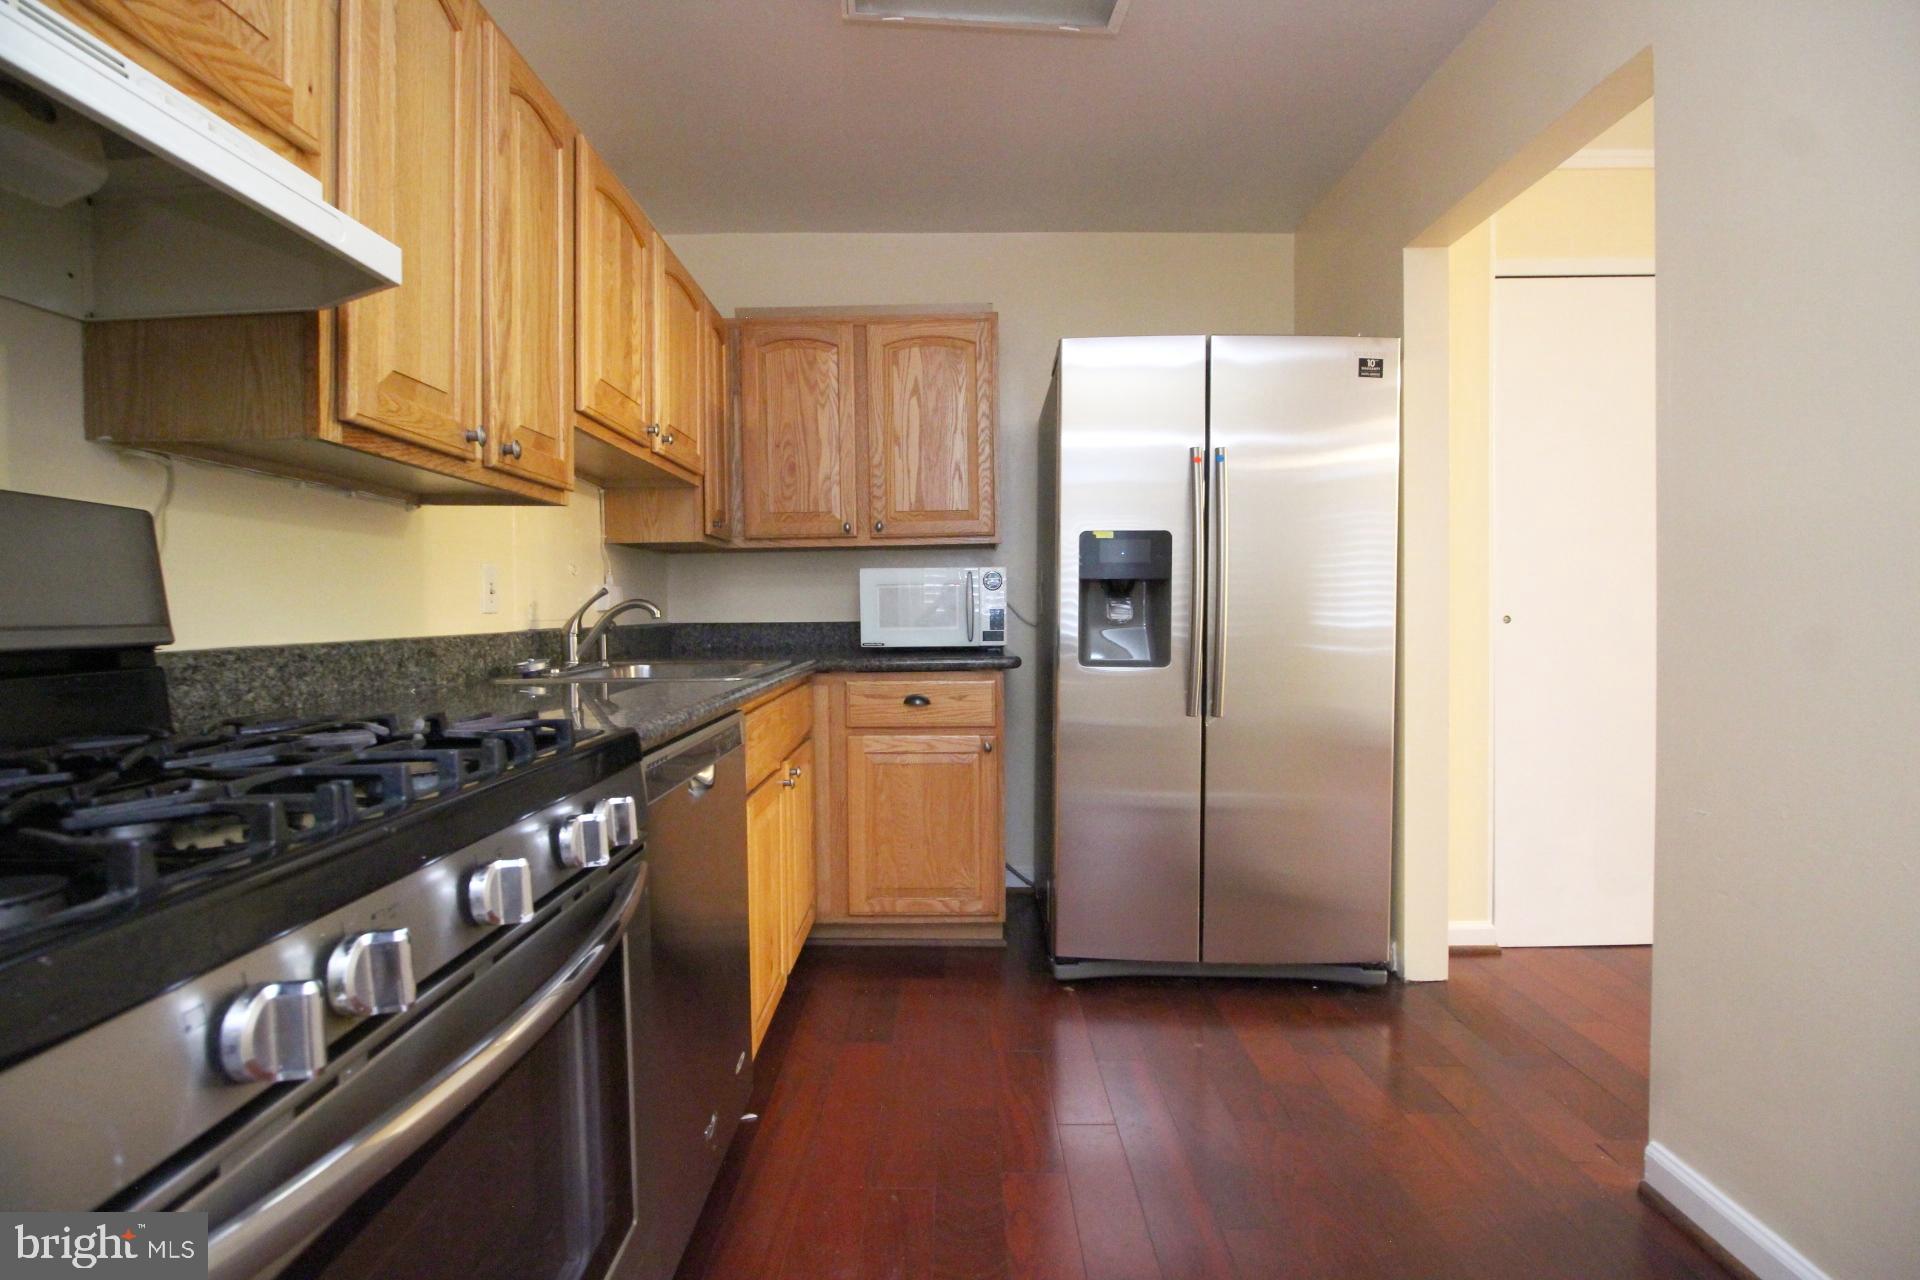 a kitchen with stainless steel appliances granite countertop a stove a refrigerator and a sink